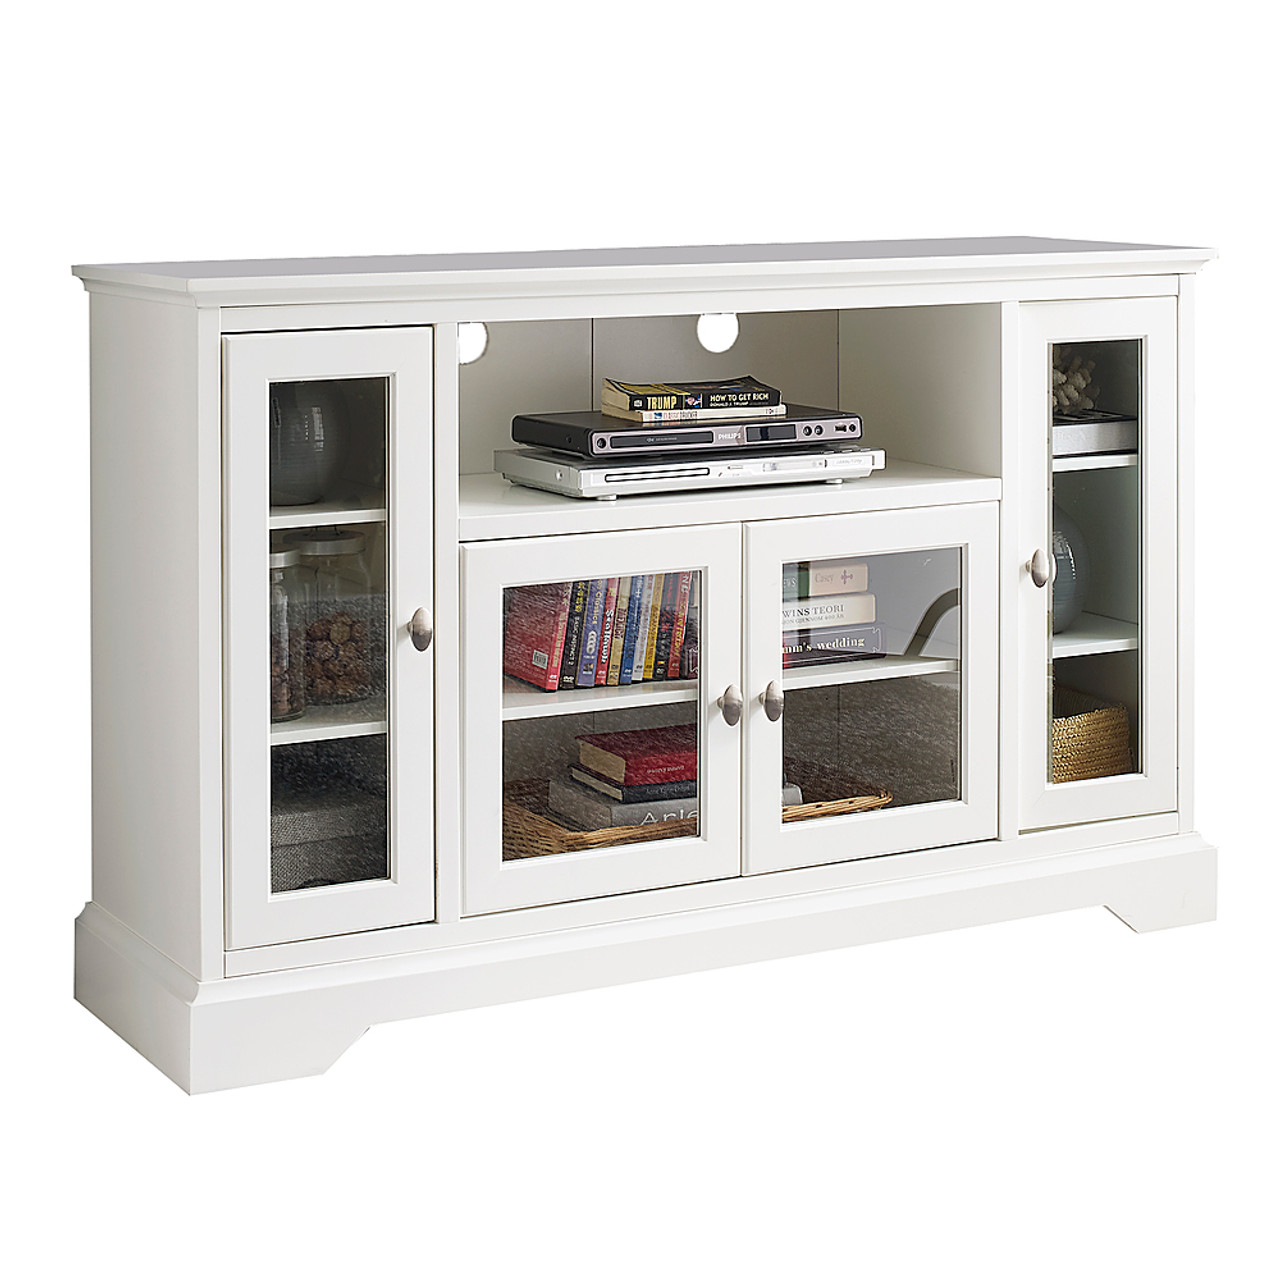 Walker Edison - TV Cabinet for Most TVs Up to 60" - White